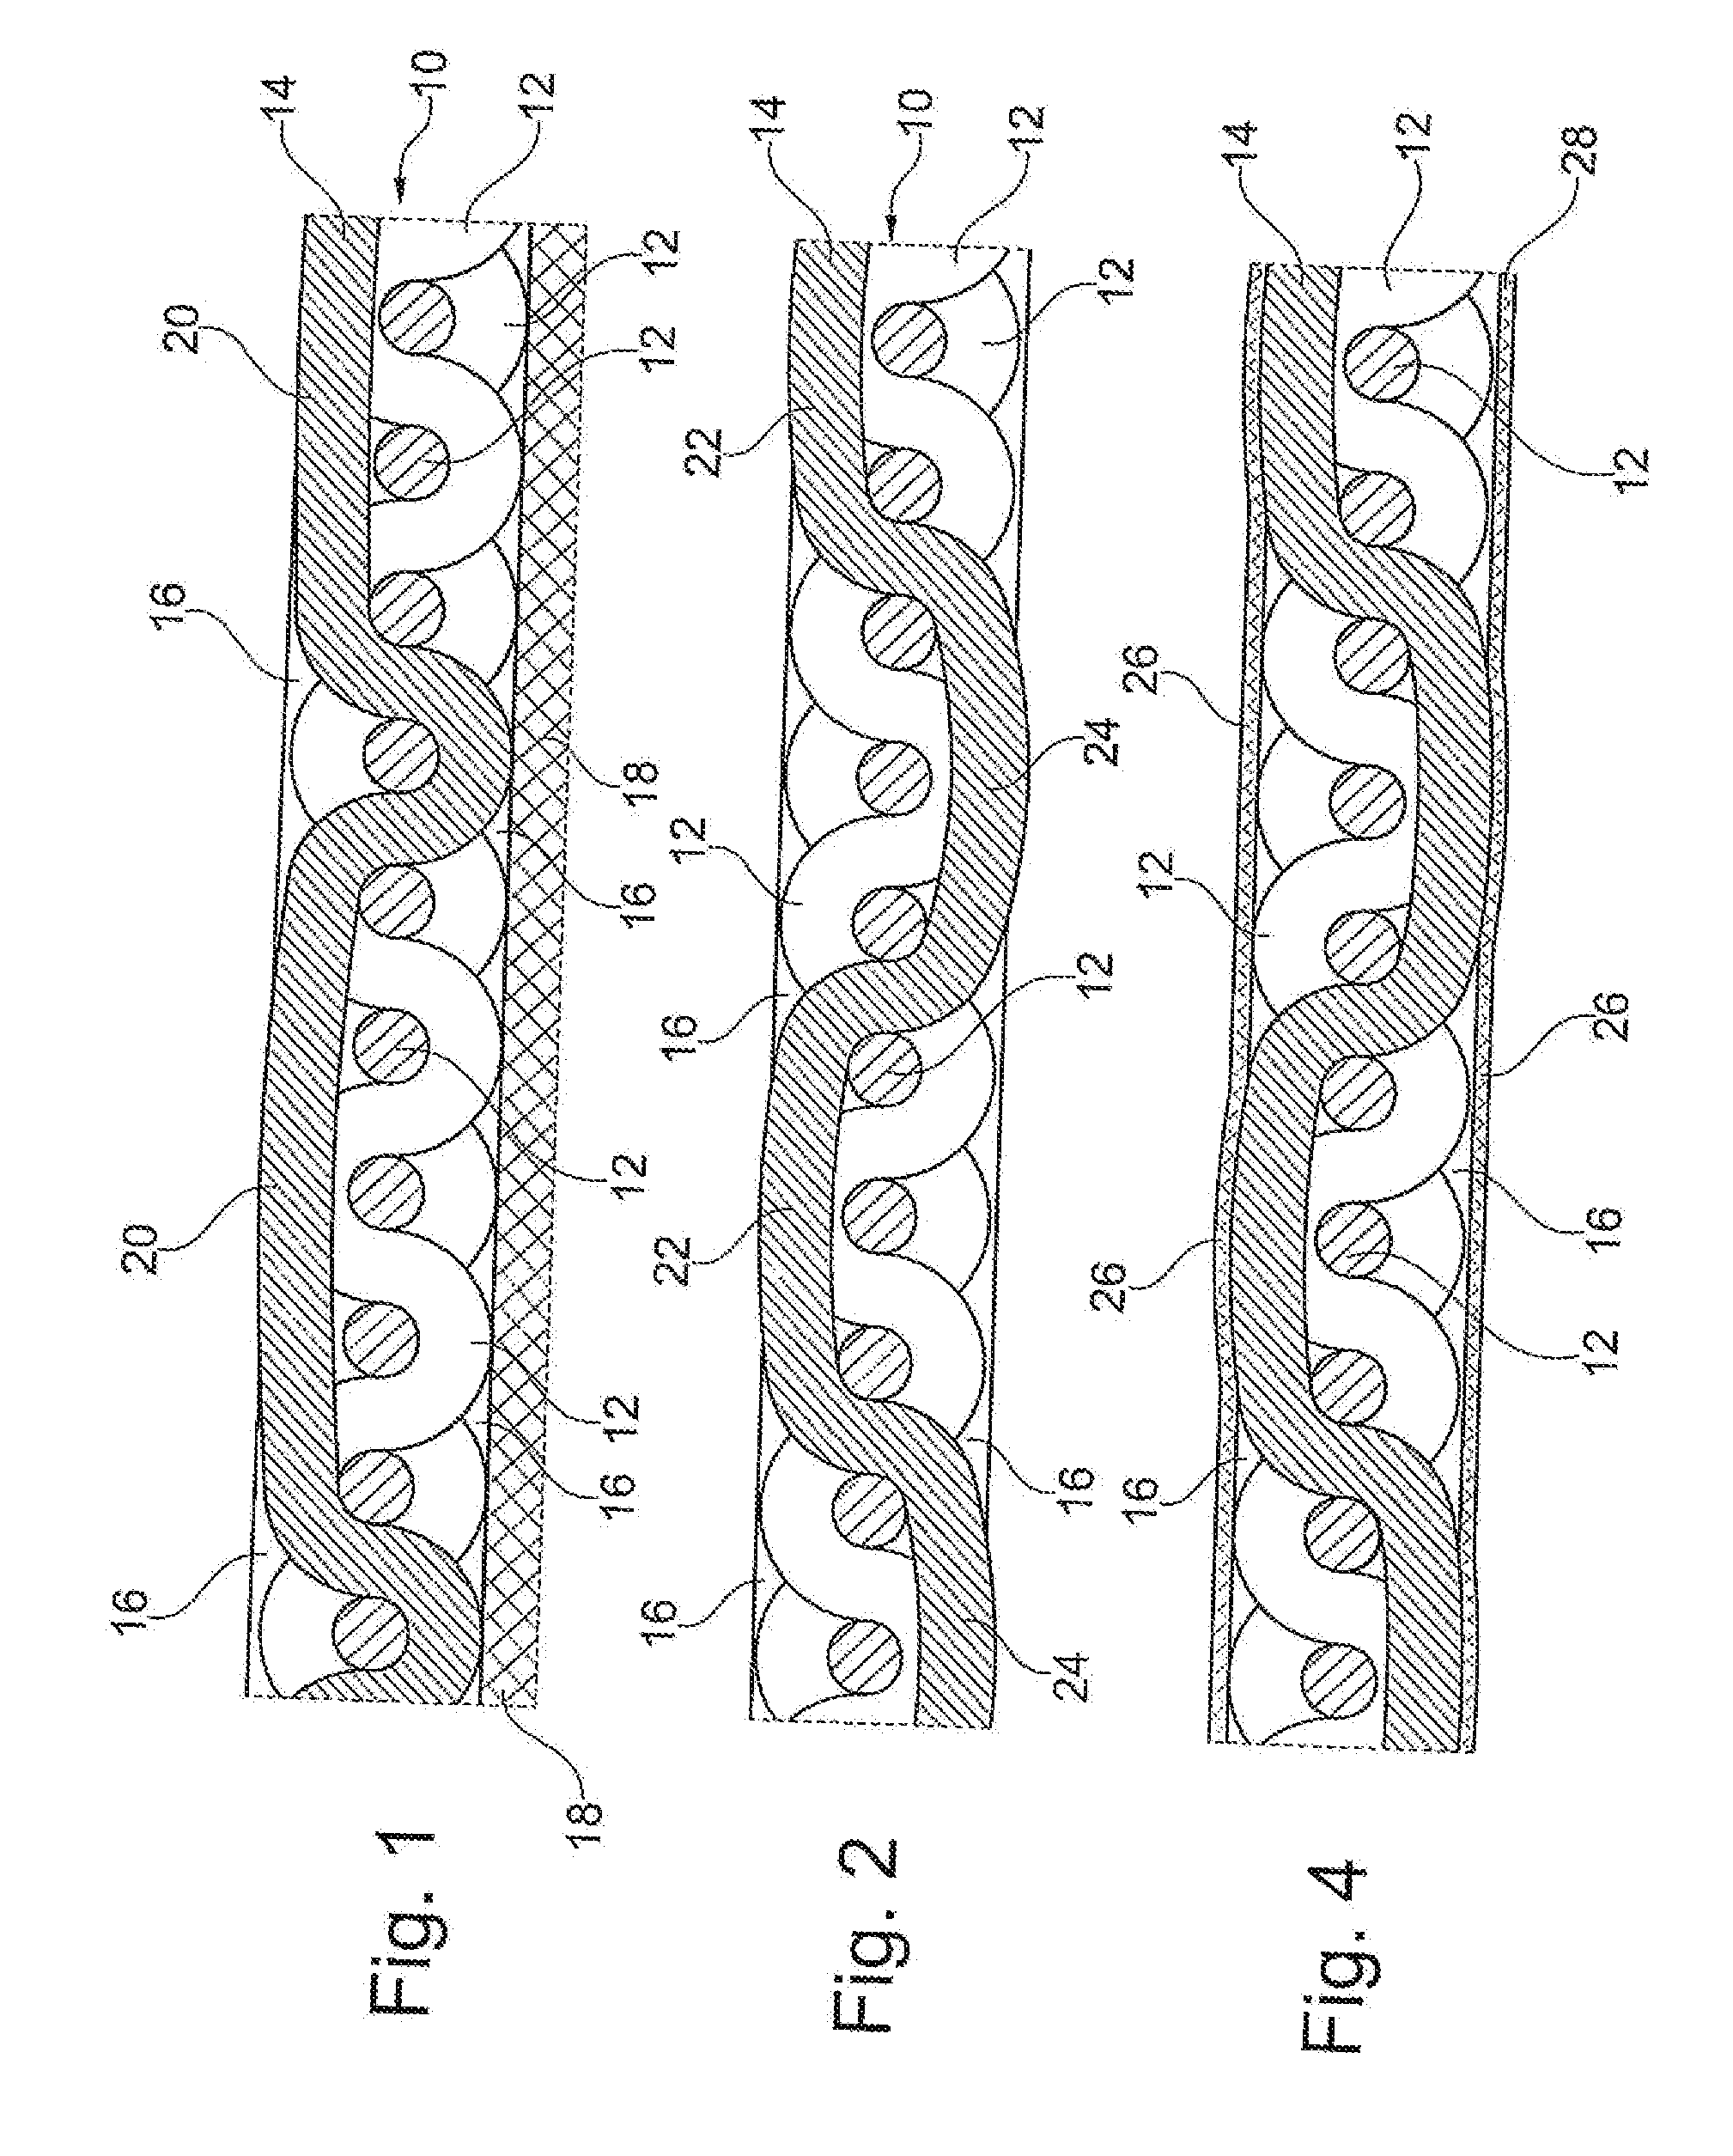 Electrode substrate and planar optoelectronic device